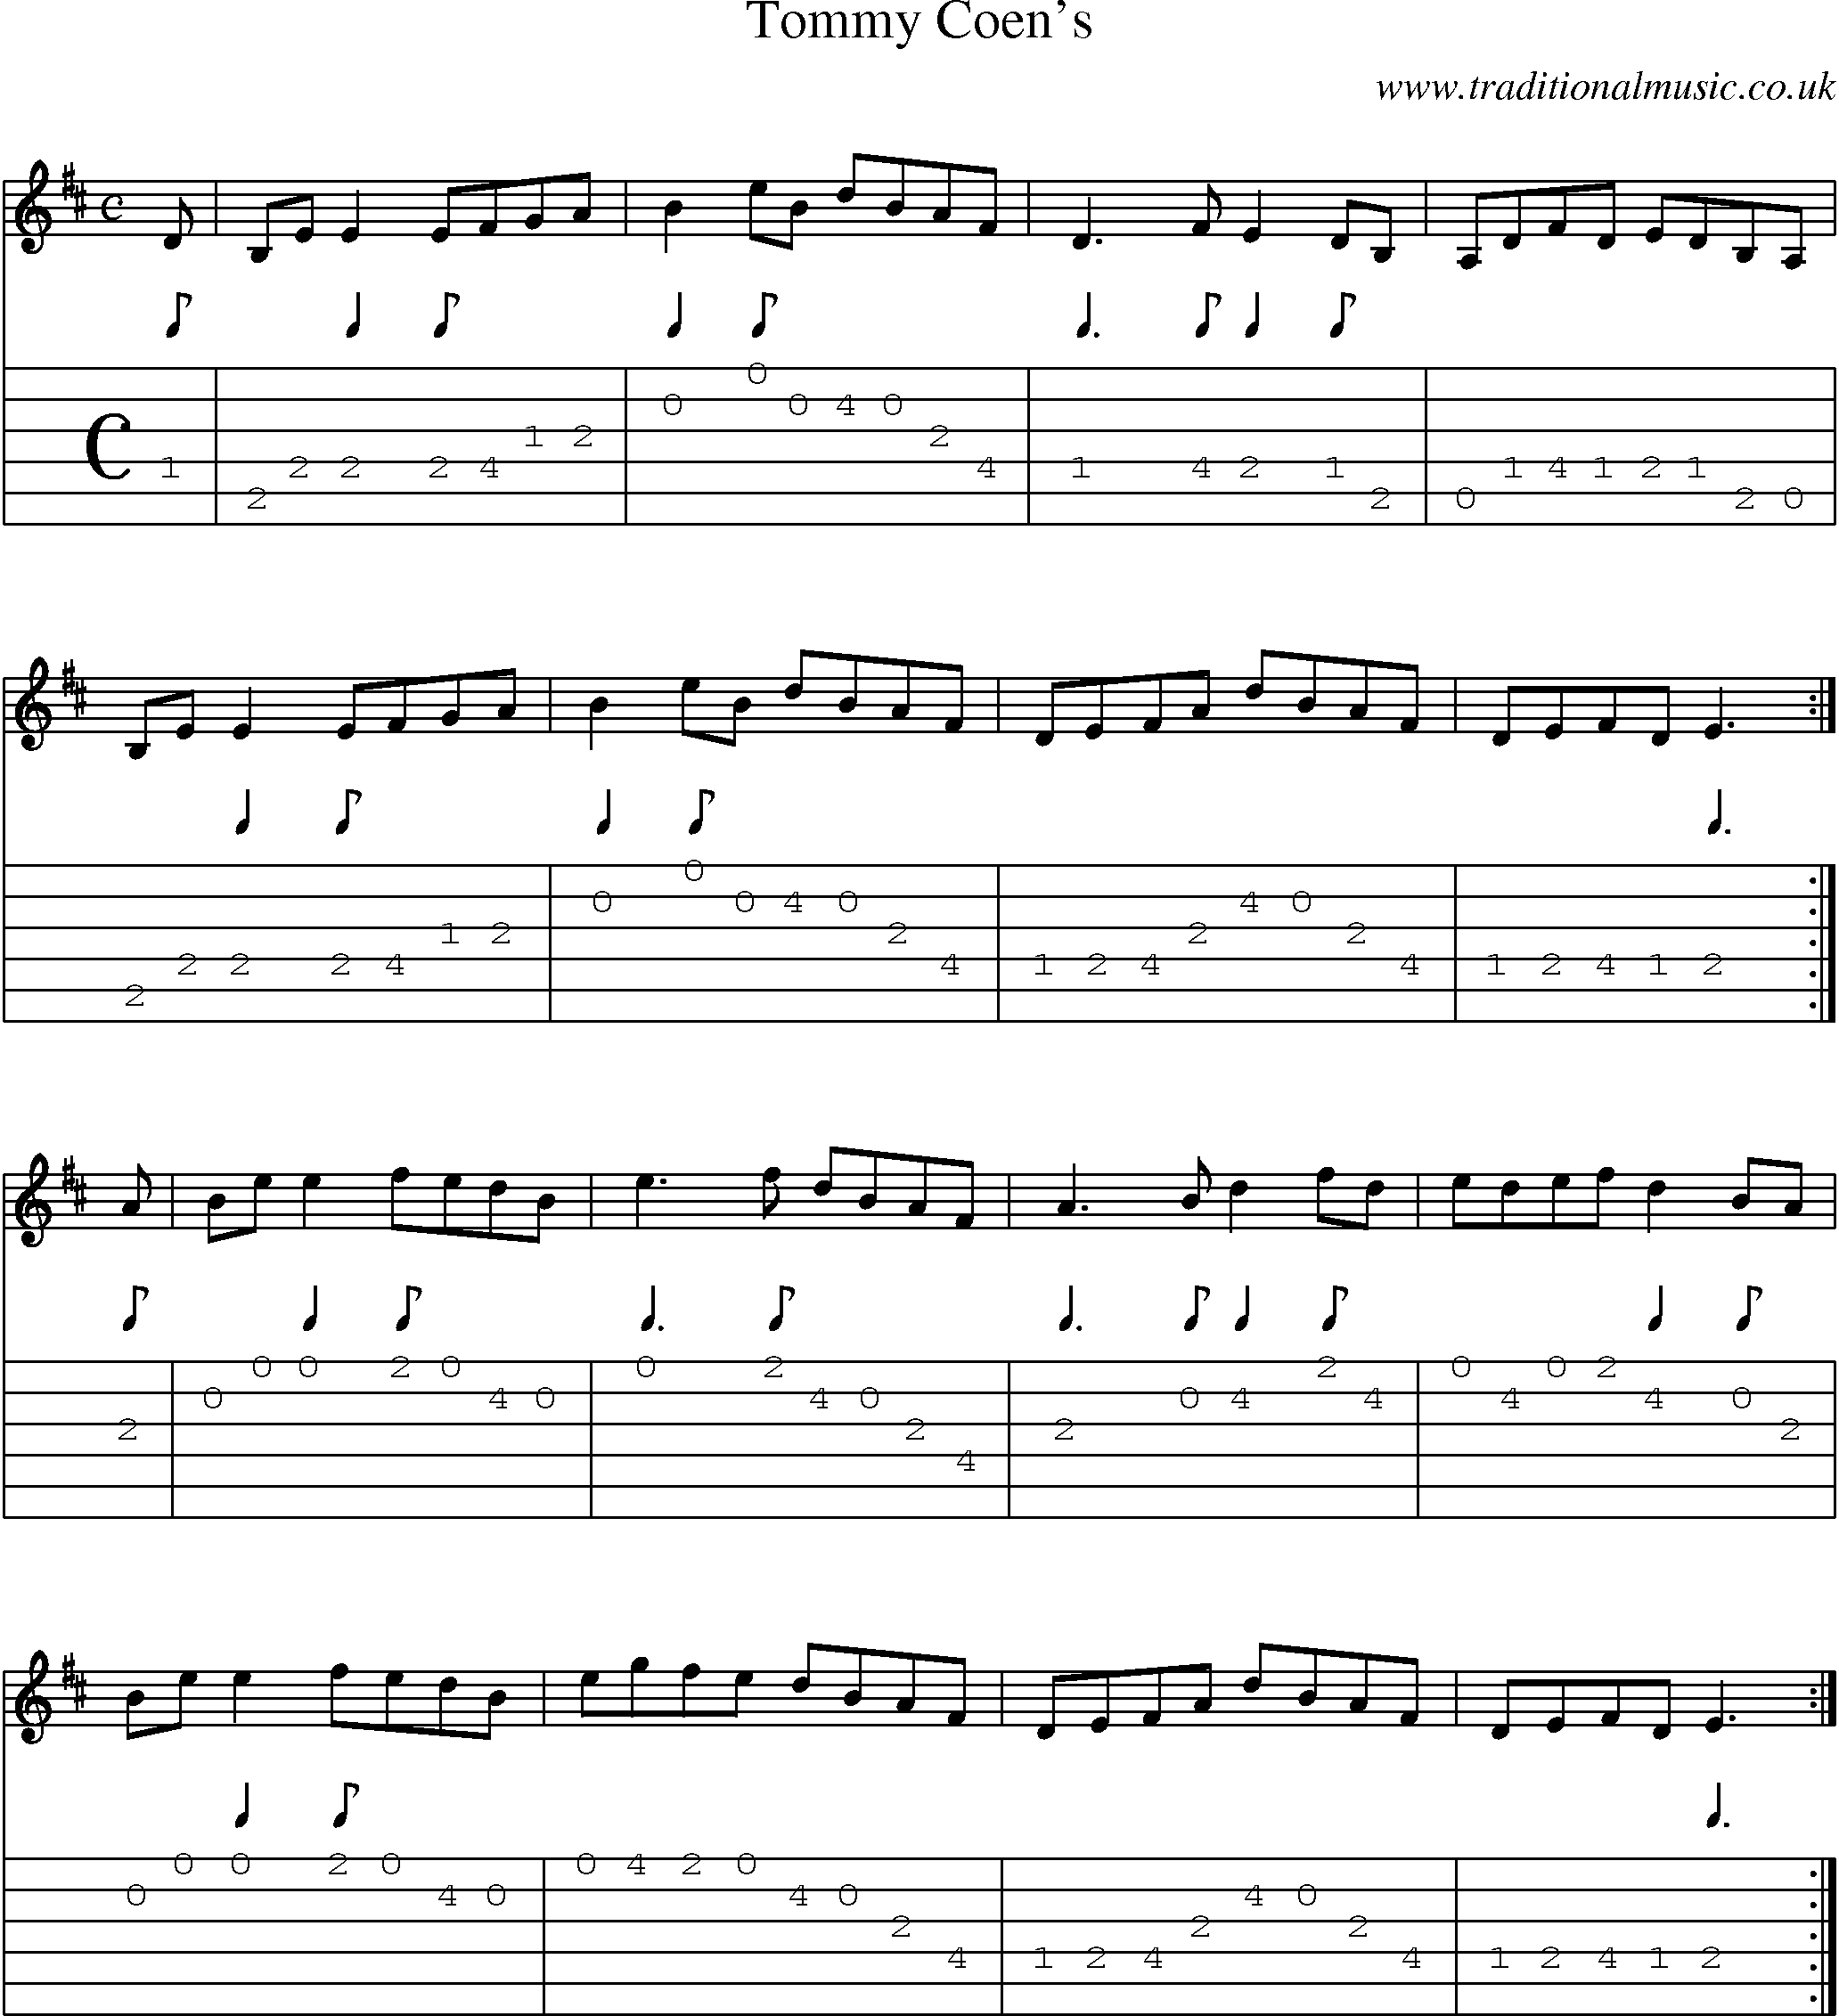 Music Score and Guitar Tabs for Tommy Coens